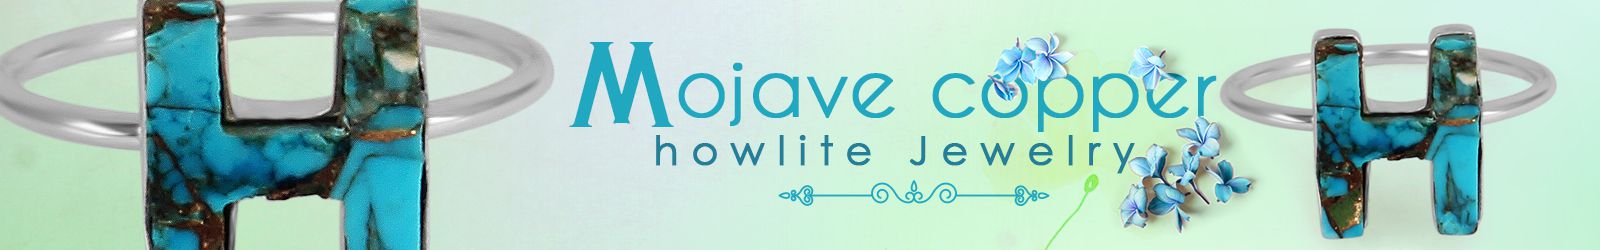 Wholesale mojave copper howlite jewelry manufacturer India